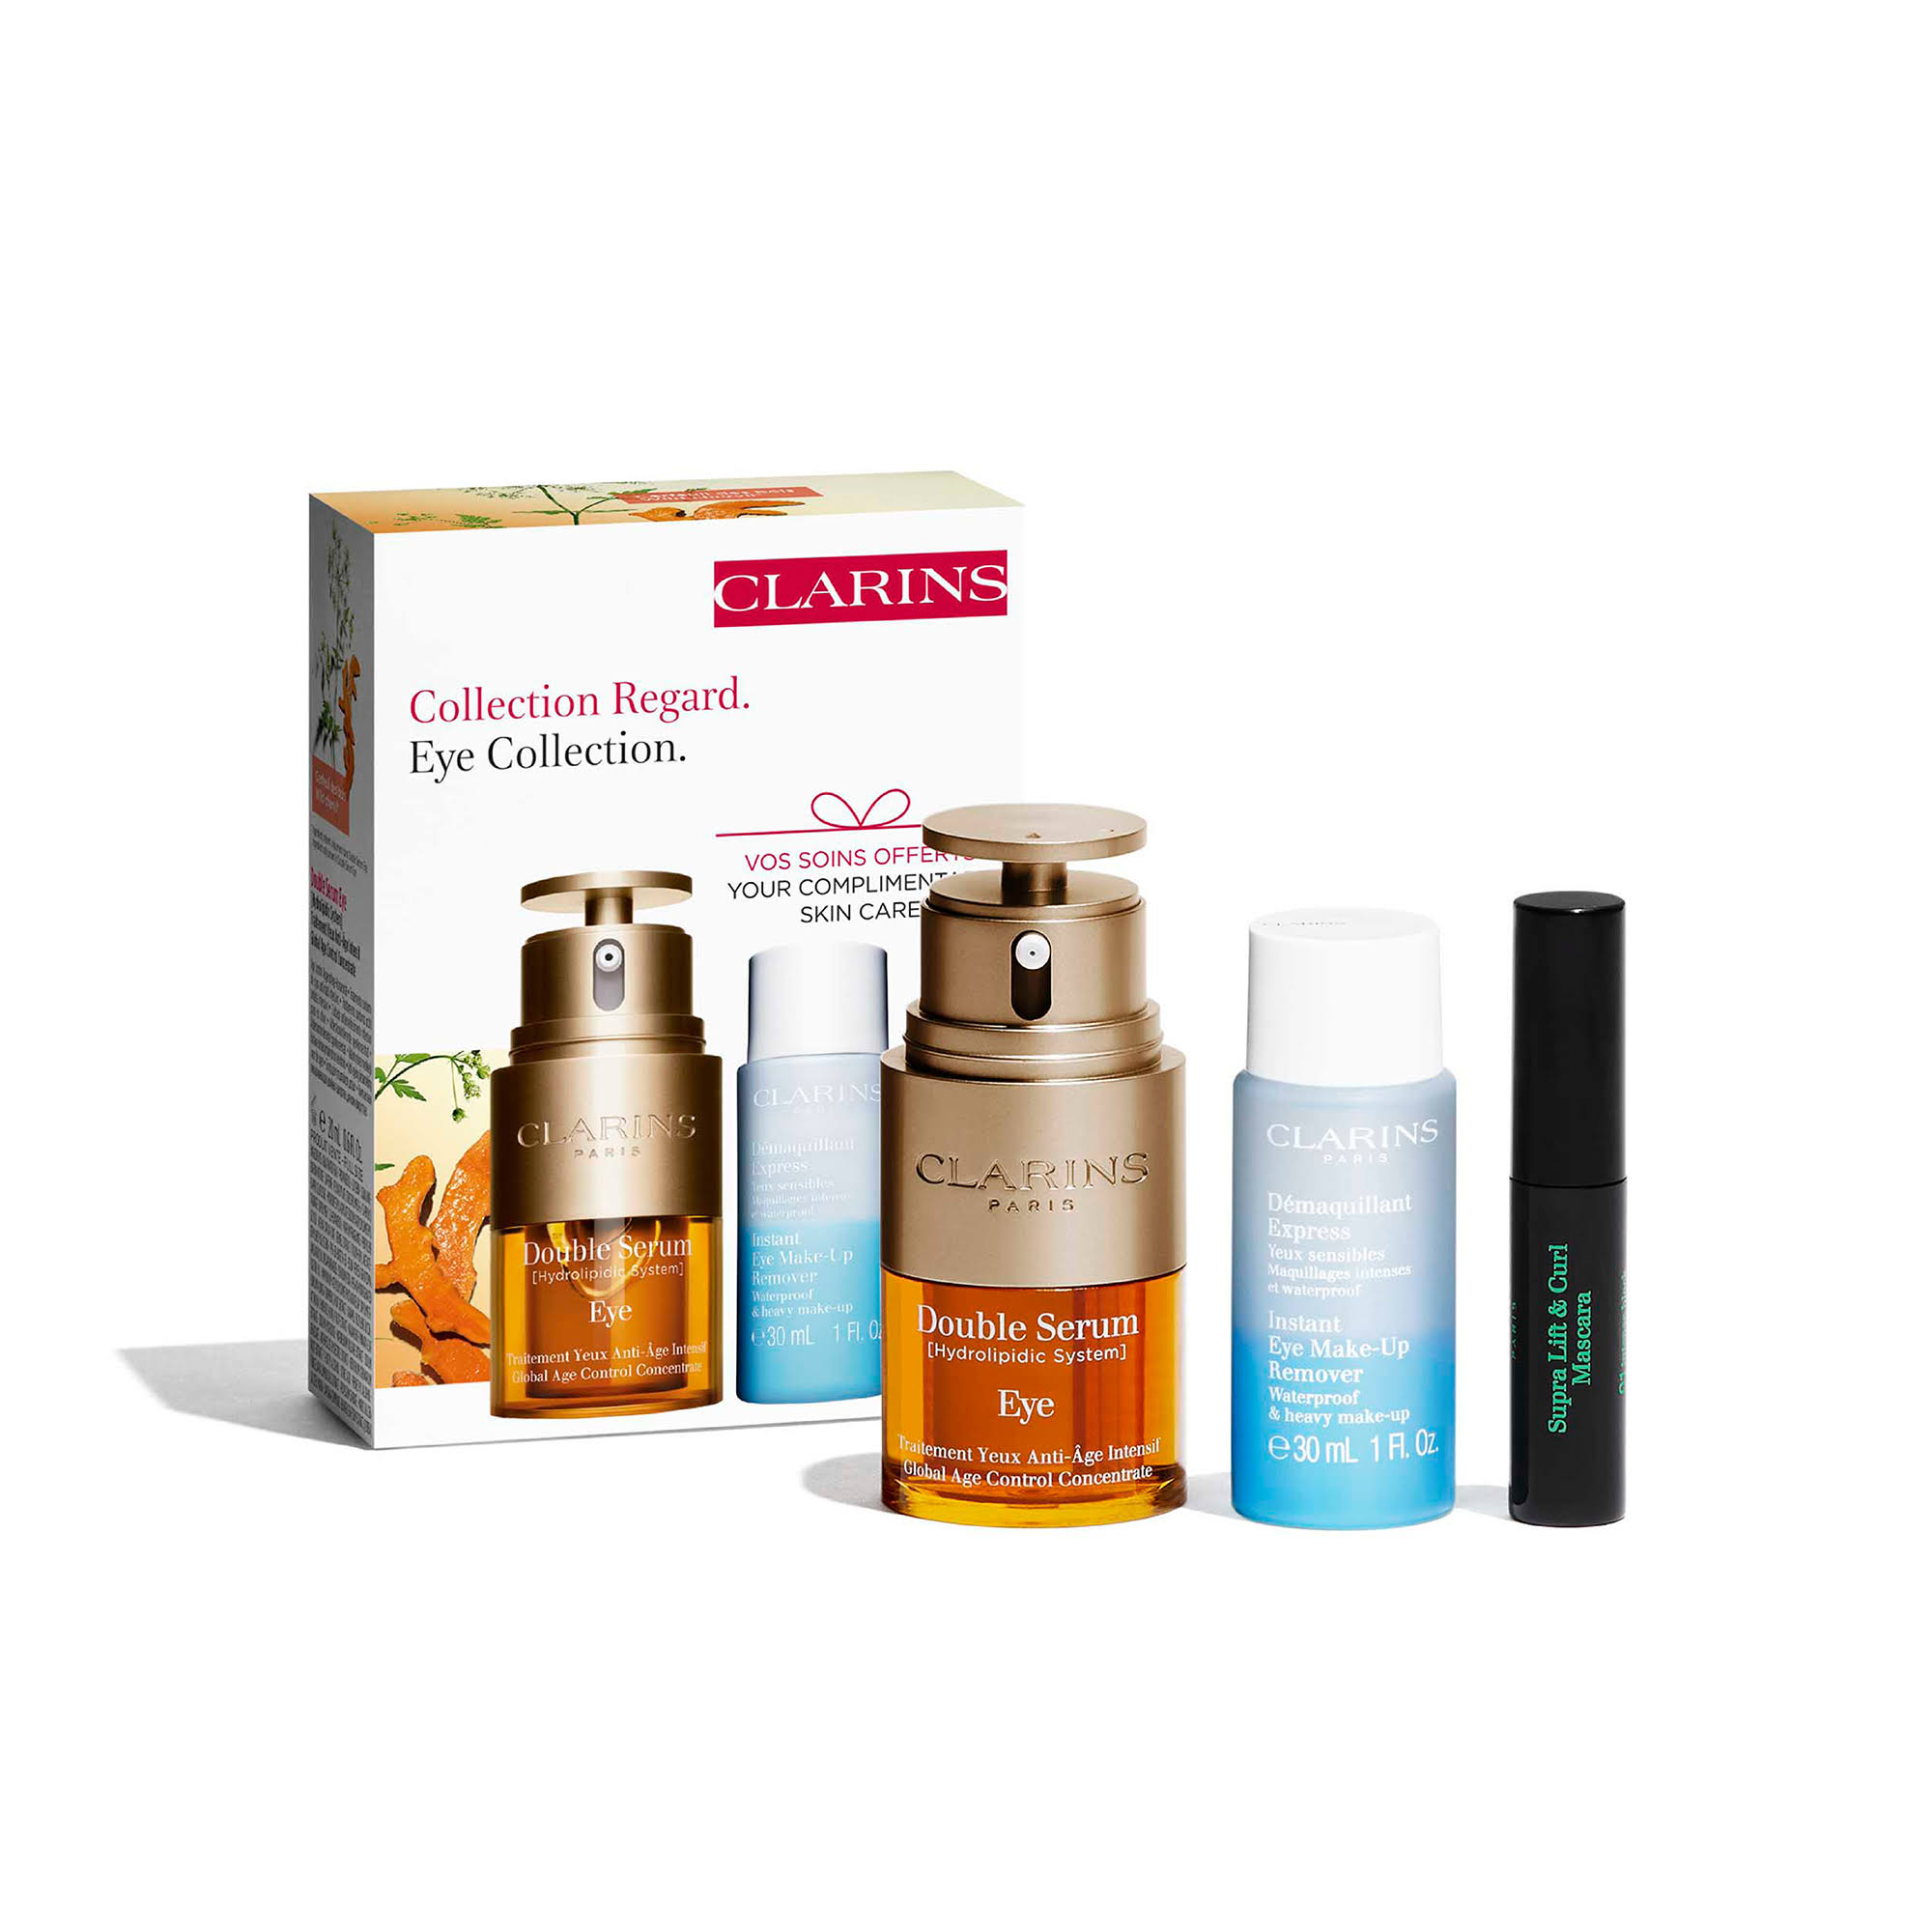 Clarins Eye Collection Gift Set